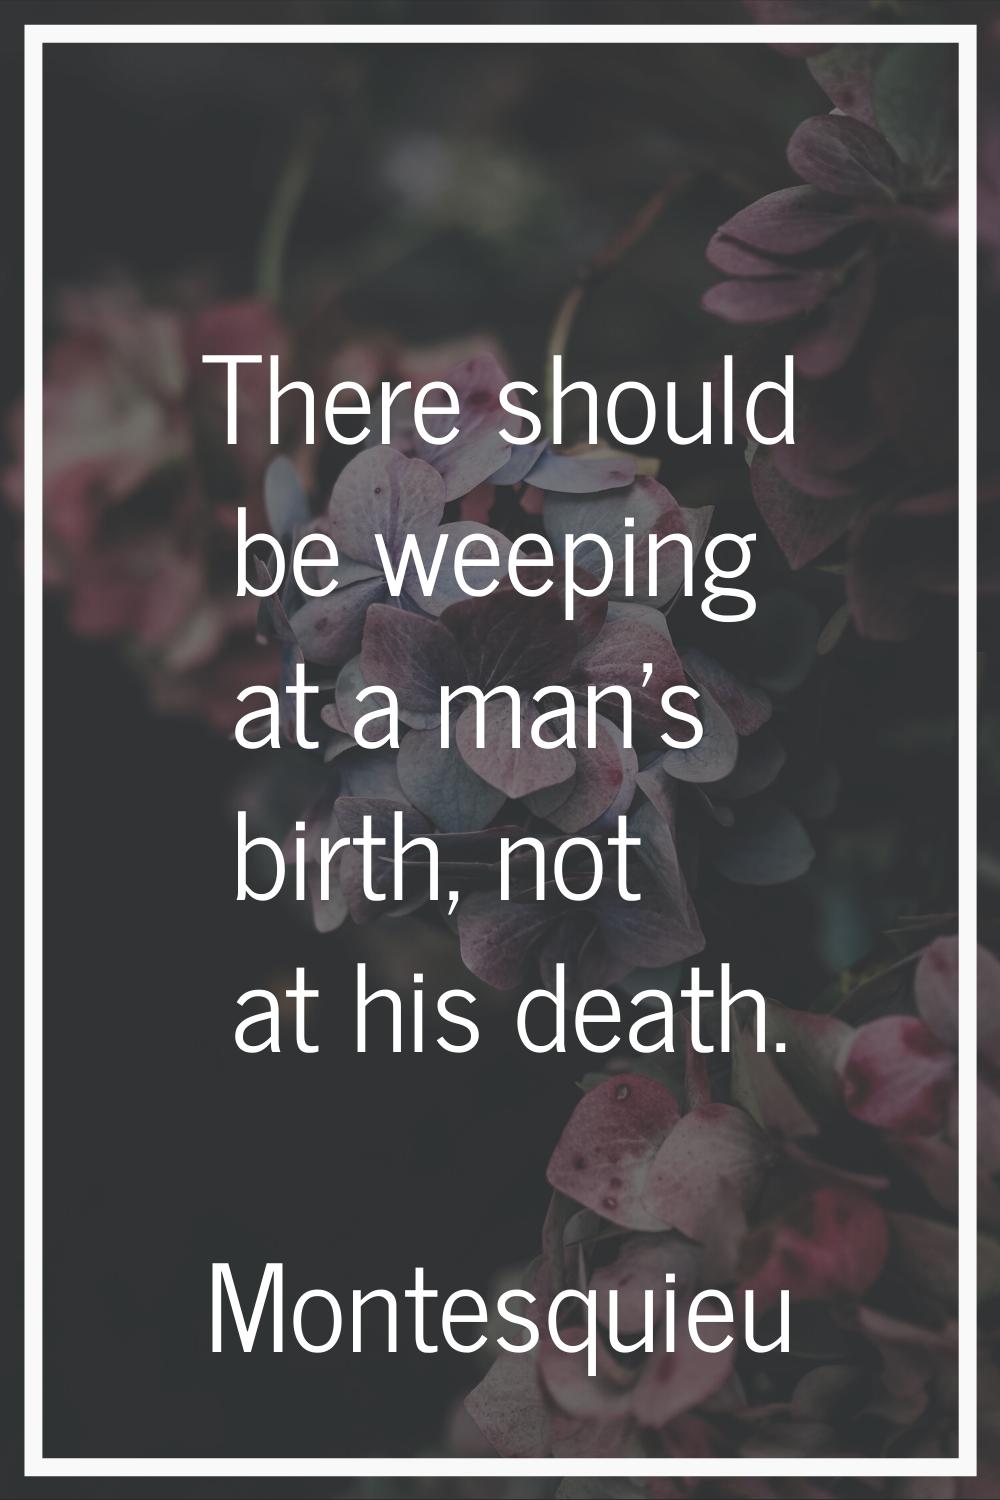 There should be weeping at a man's birth, not at his death.